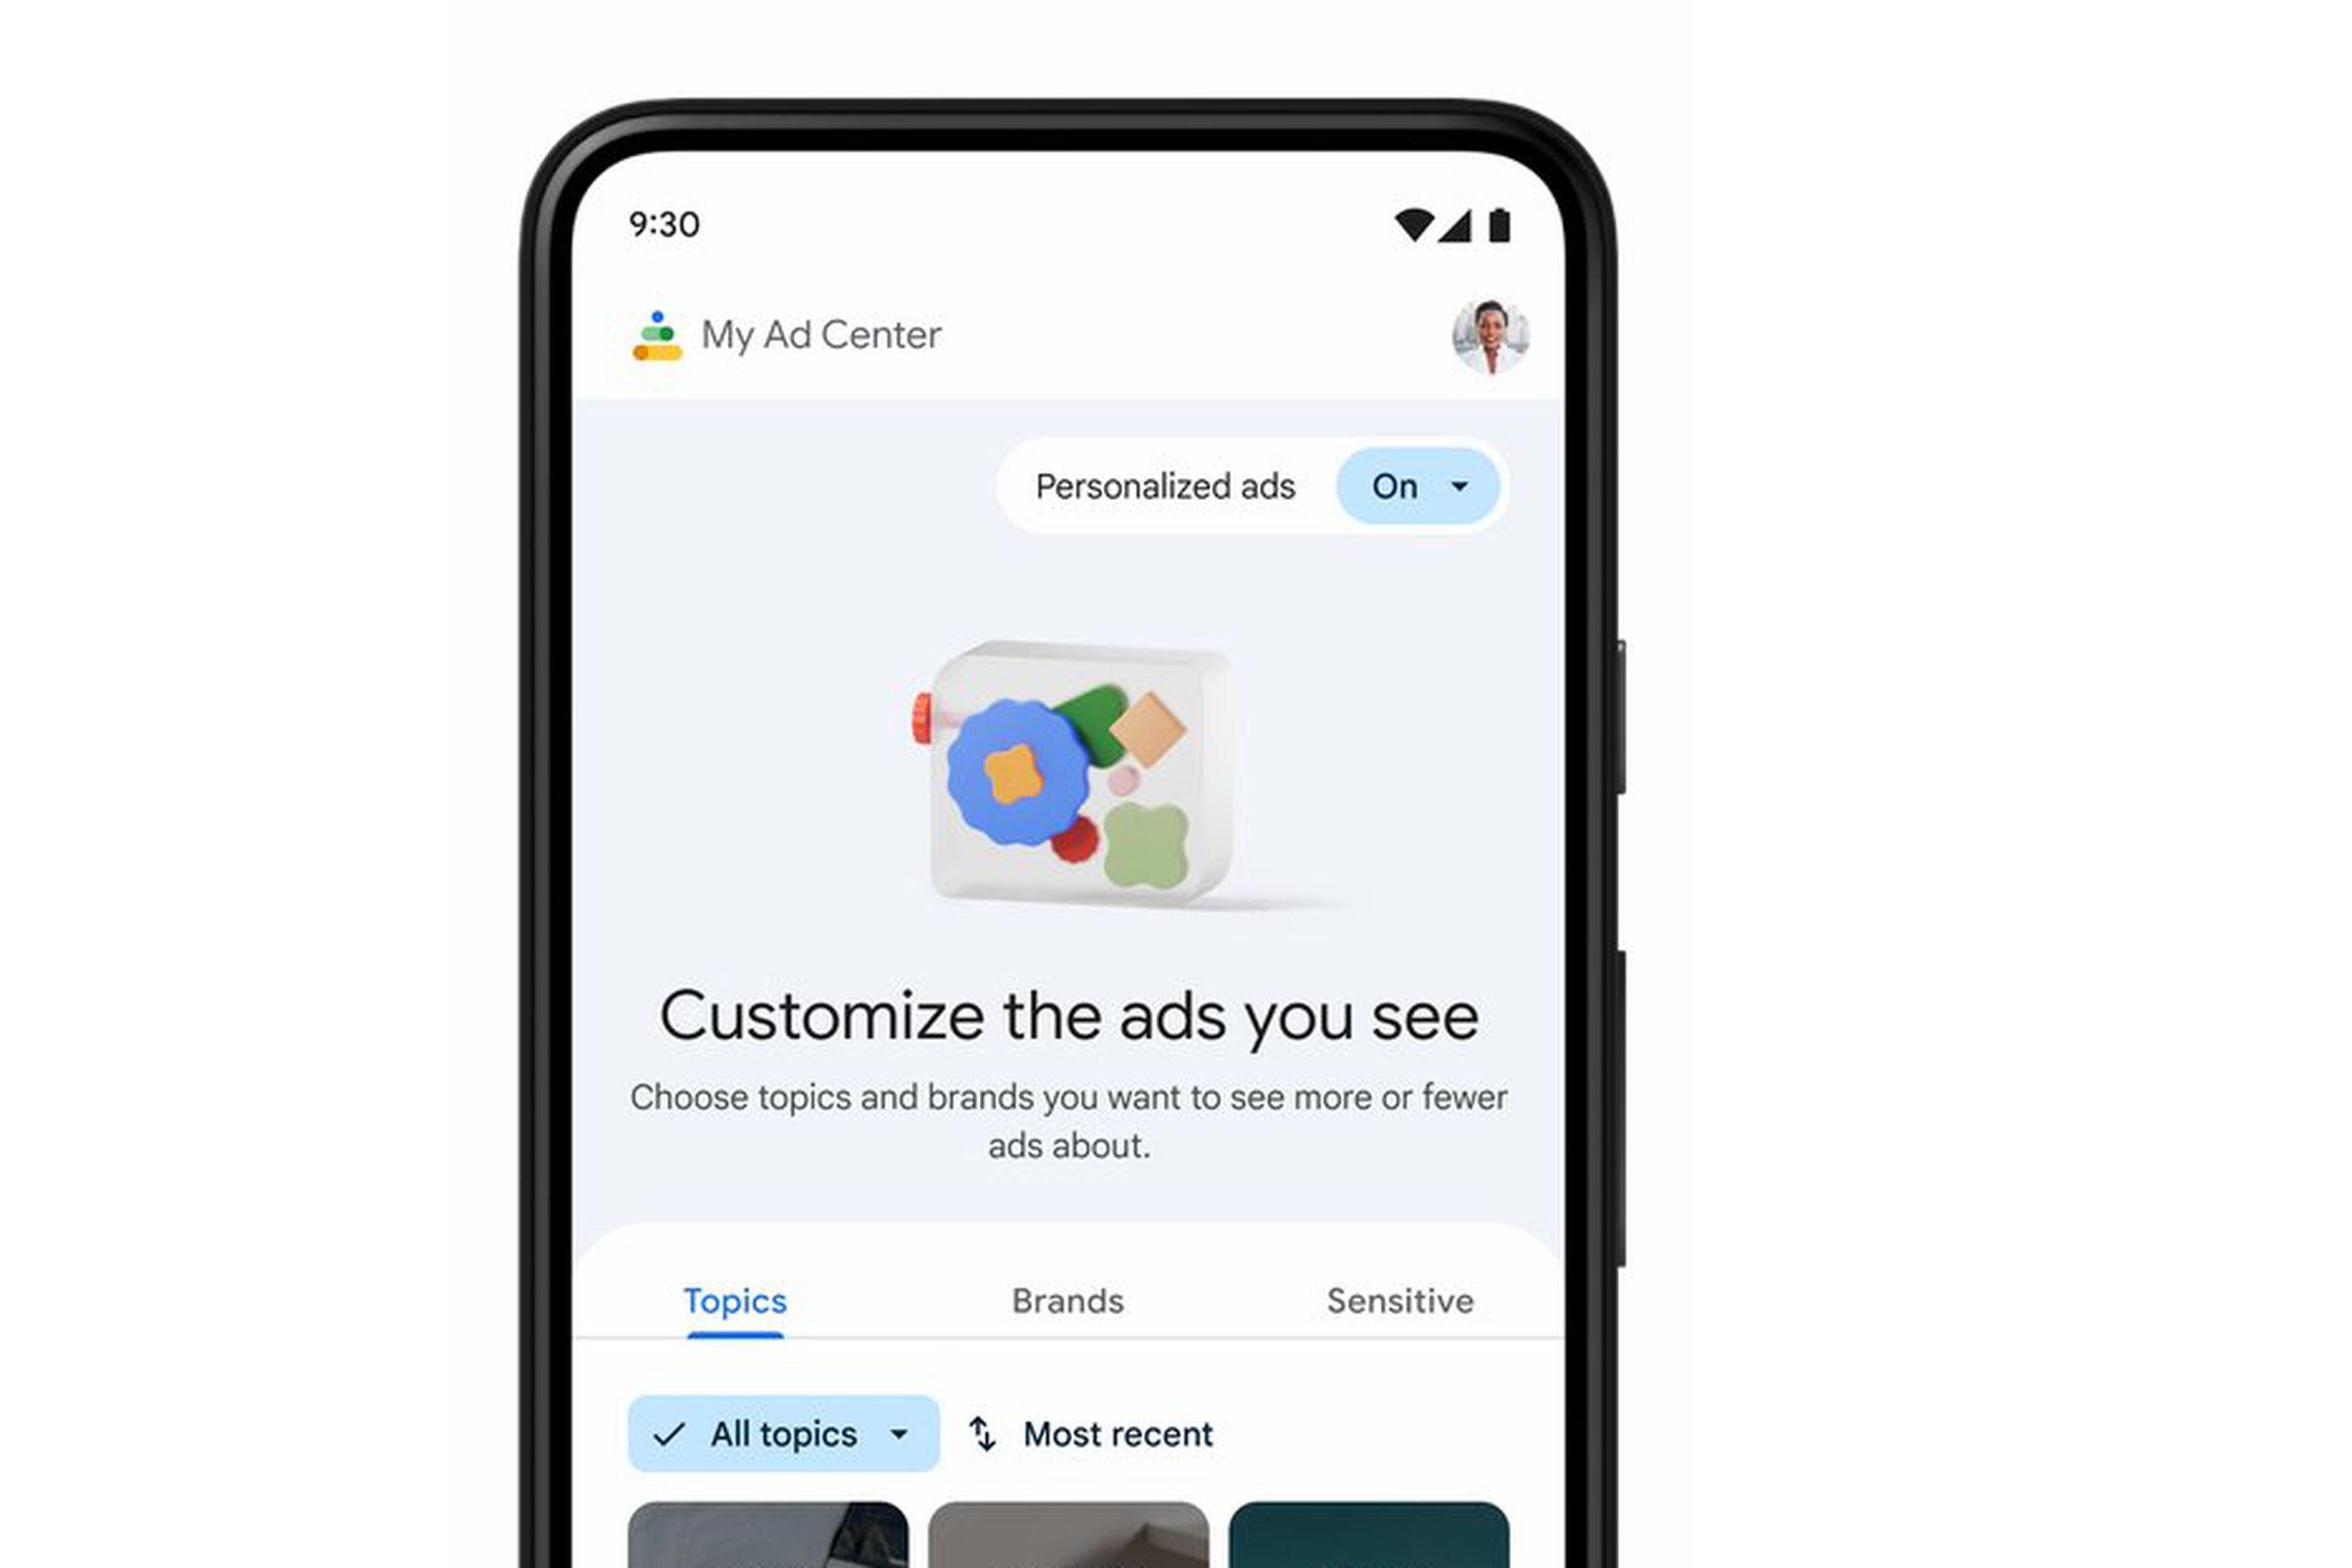 Simulated screenshot of Google My Ad Center on a phone screen, showing ways to “Customize the ads you see” by setting which topics or brands you want to see more or fewer ads about.